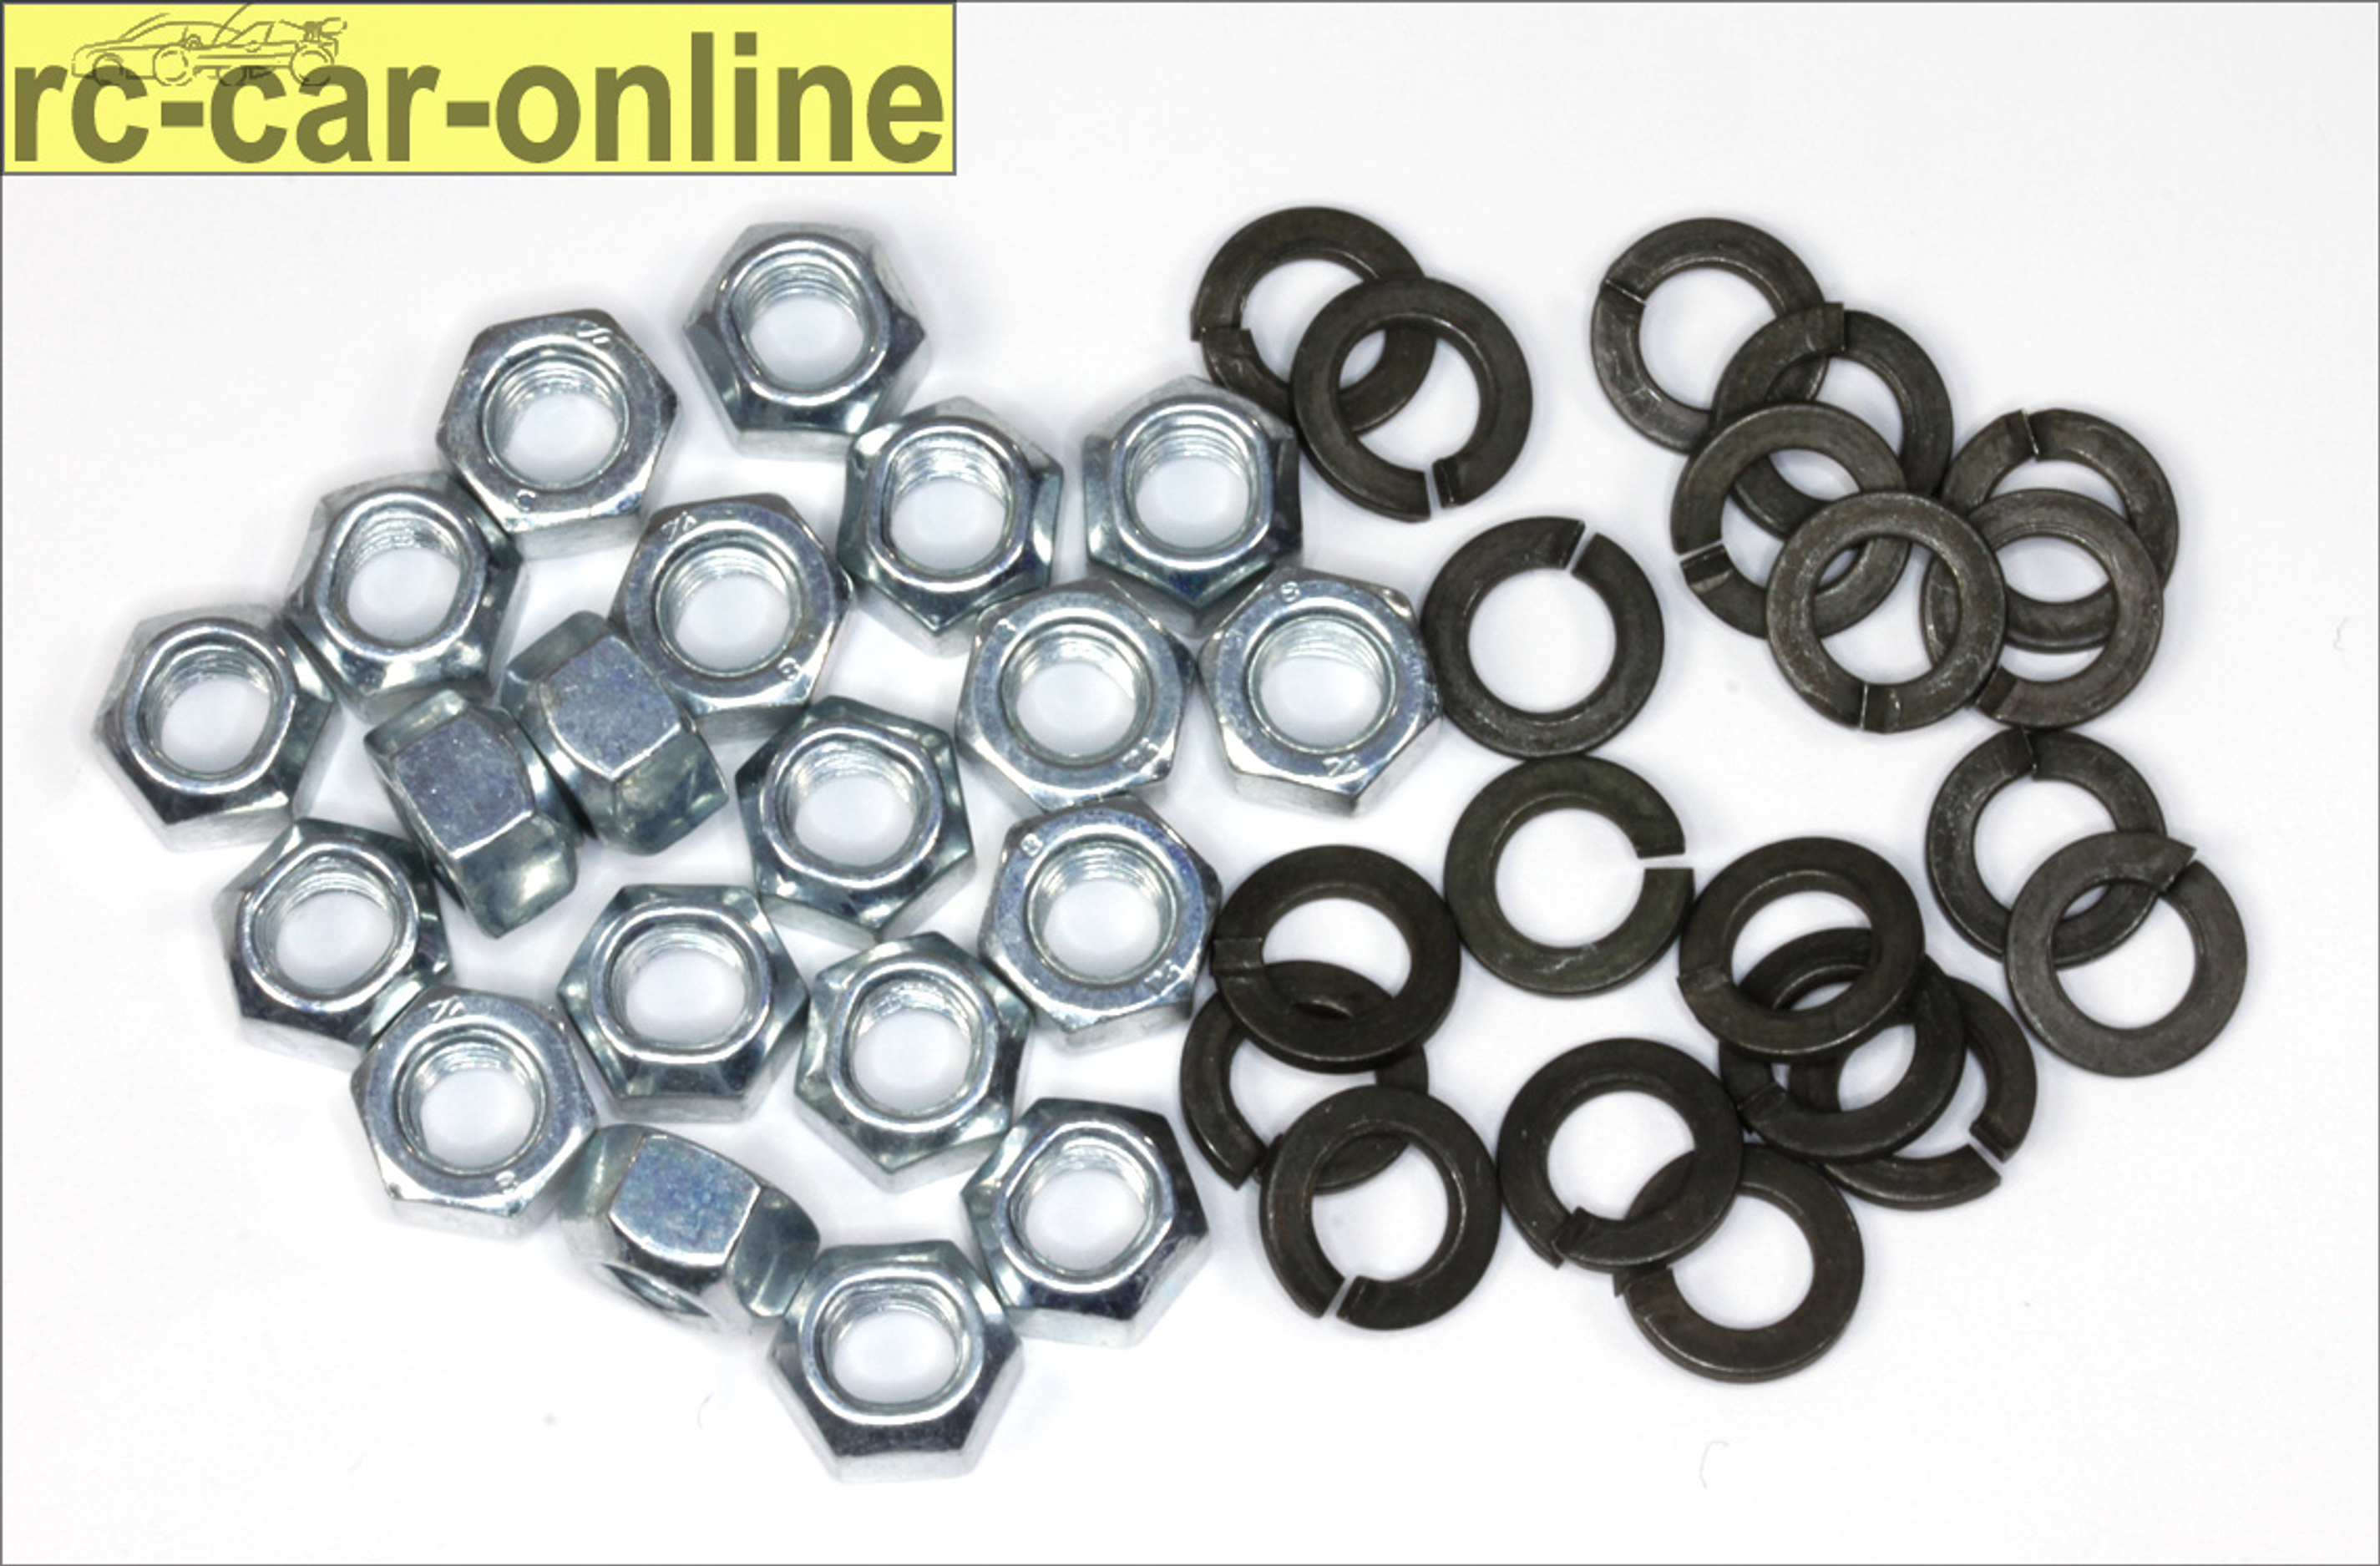 y1379/01 Refill pack full metal self locking nuts and spring lock washers